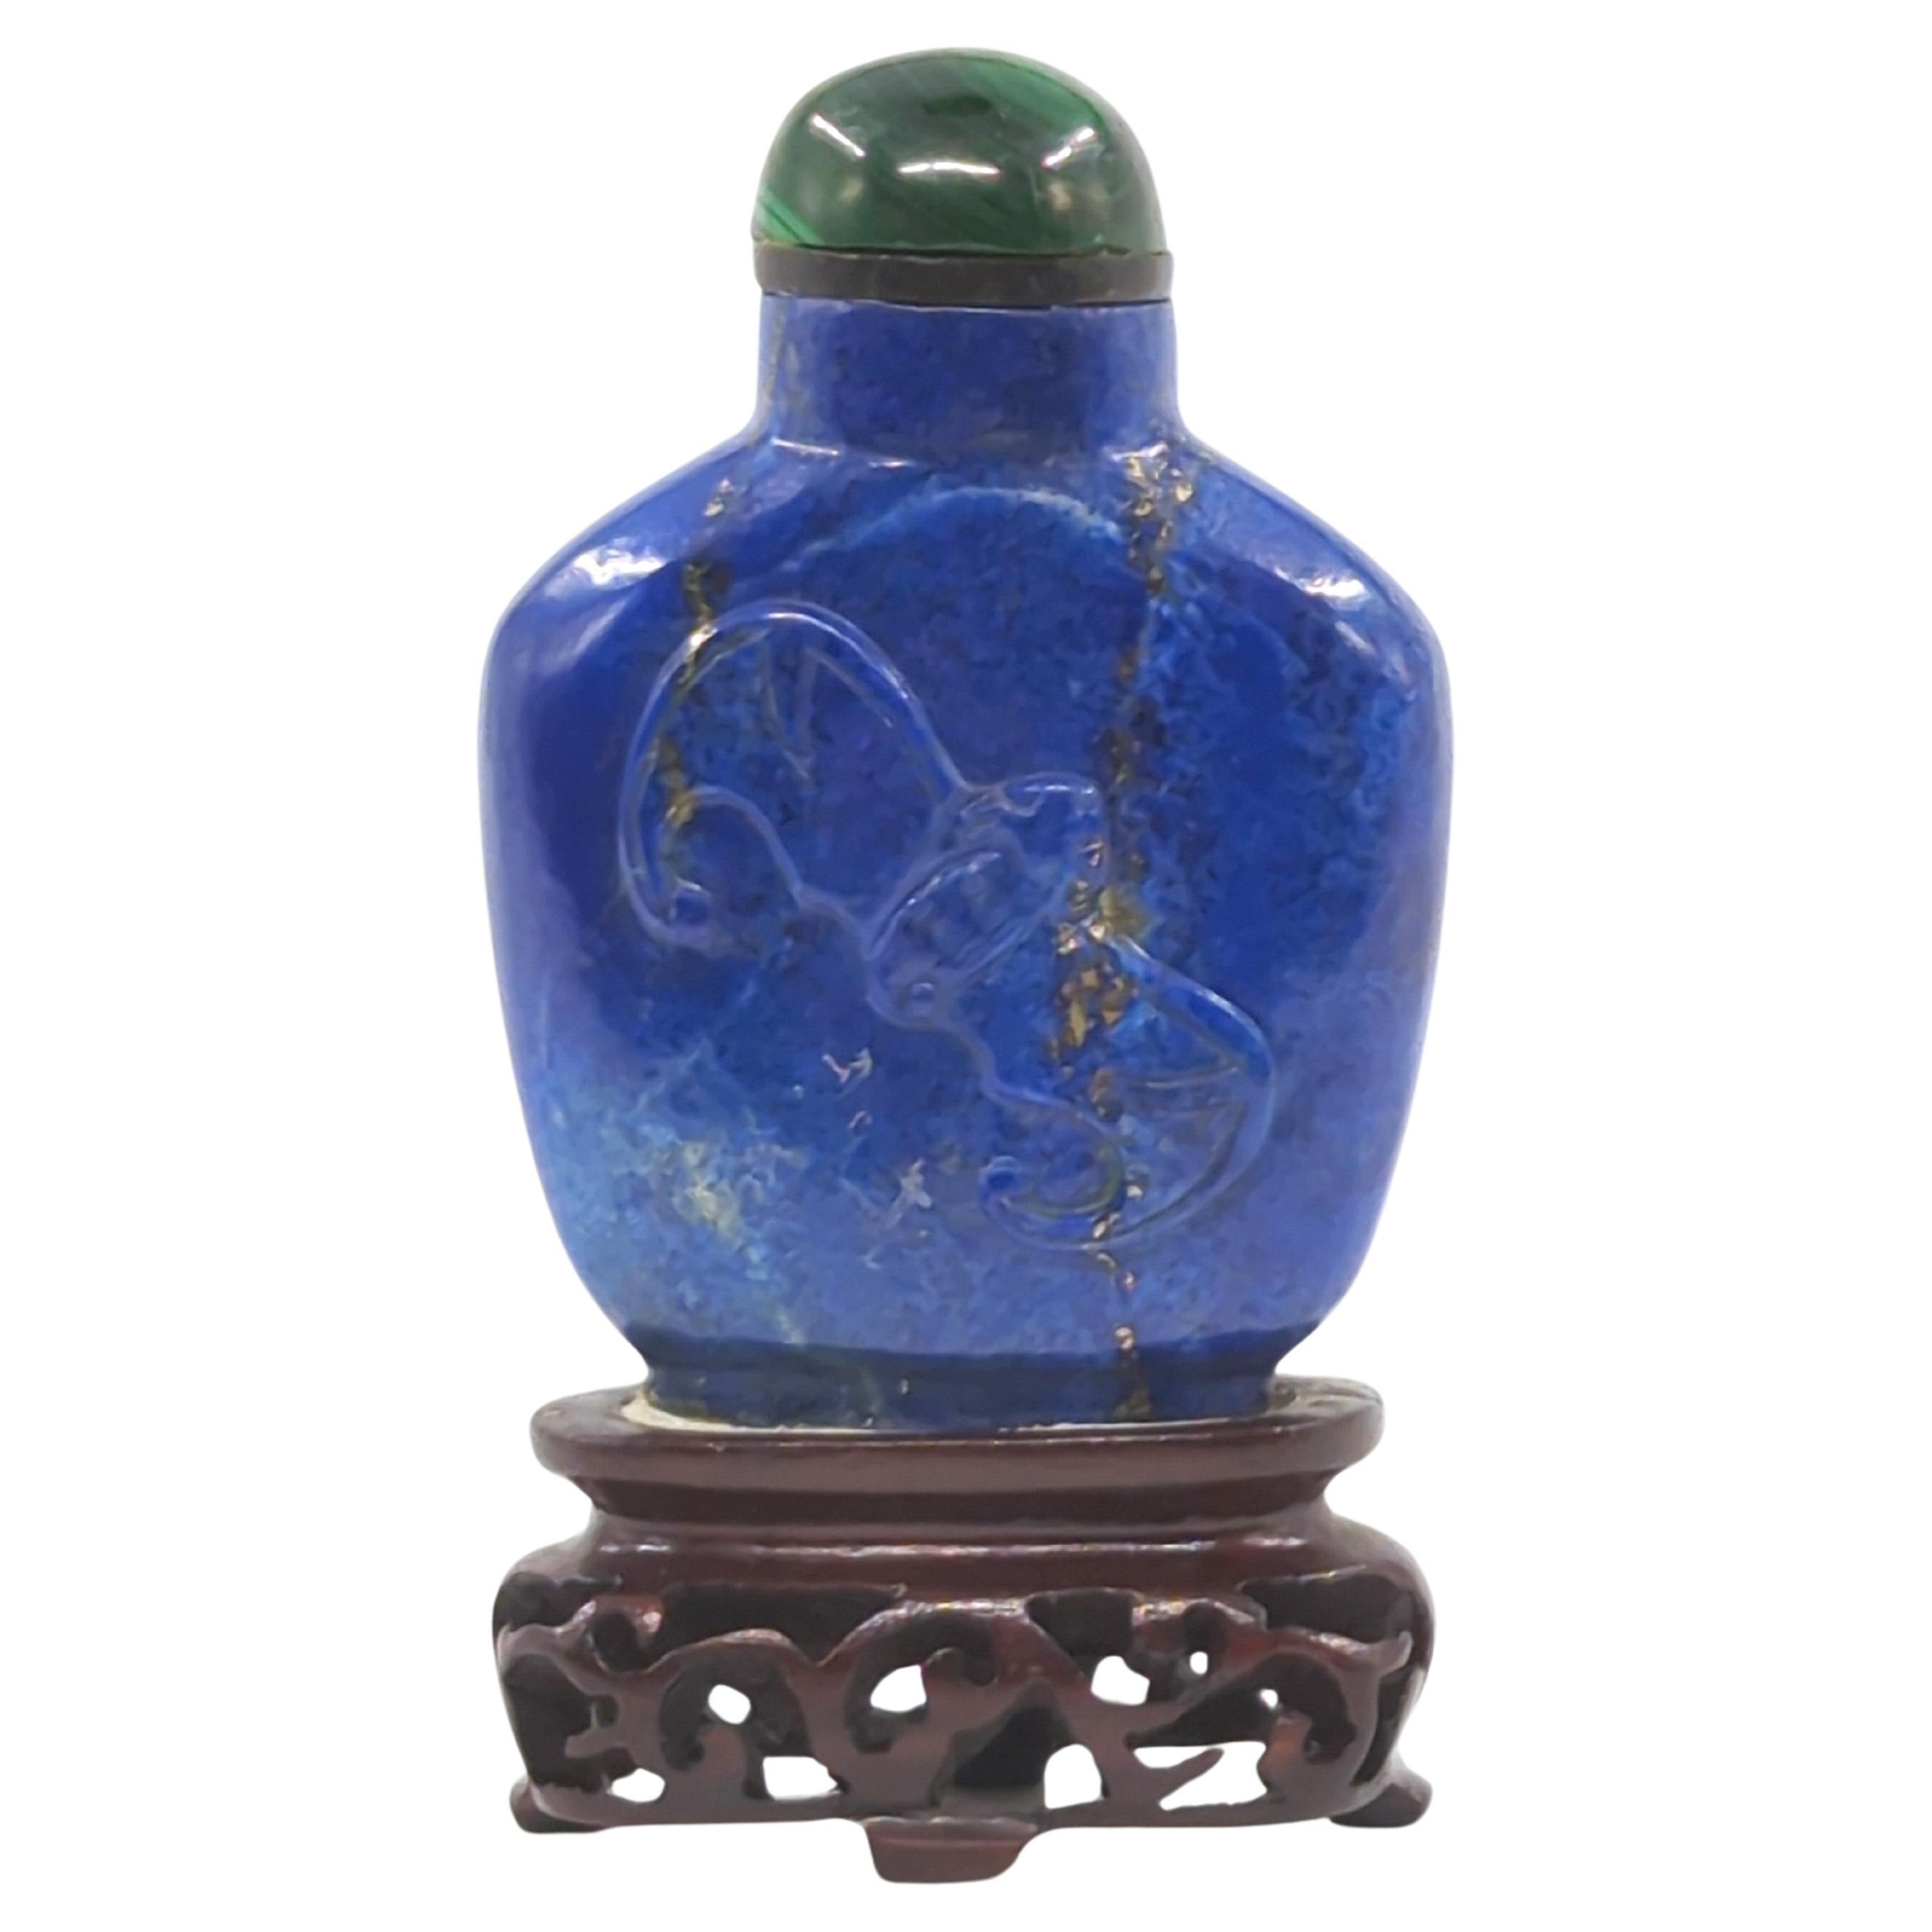 Qing Antique Chinese Lapis Lazuli Relief Carved Snuff Bottle on Stand c.1920 For Sale